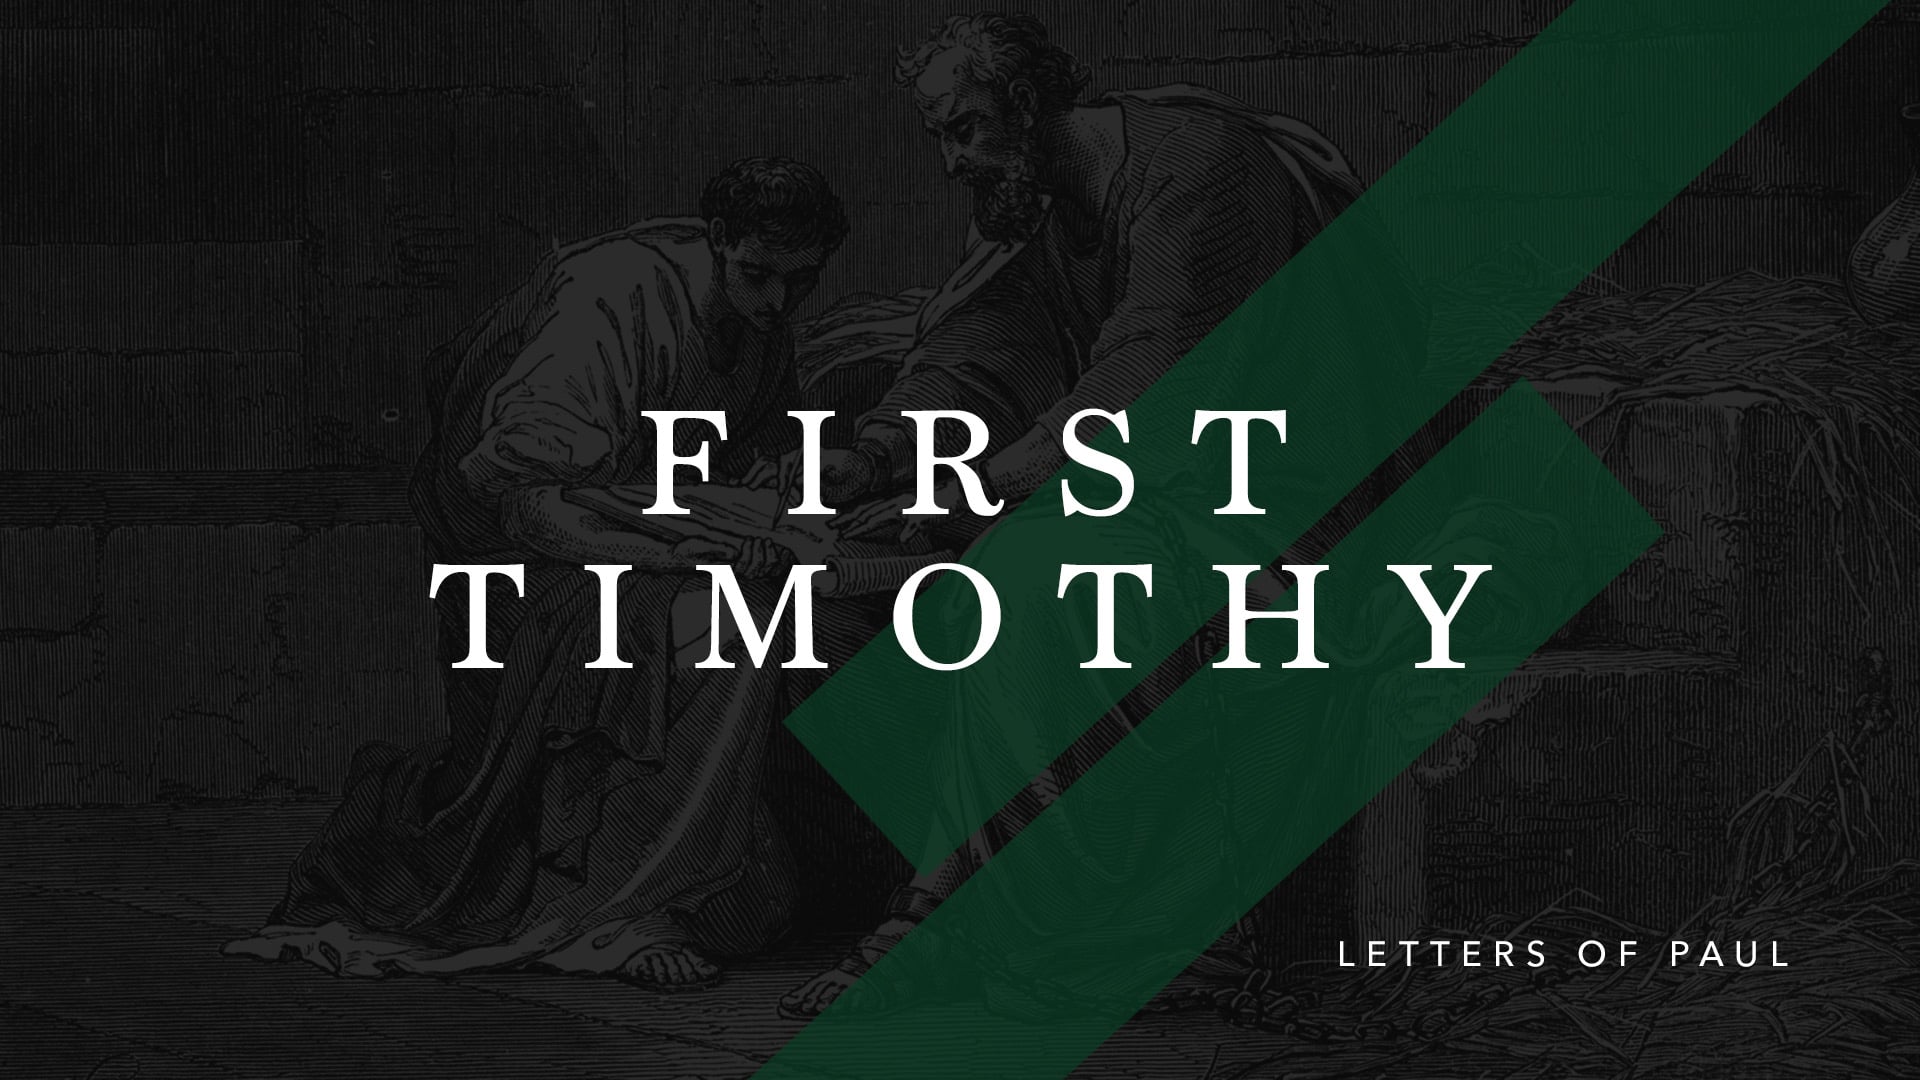 First Timothy: Putting Off The Old Self